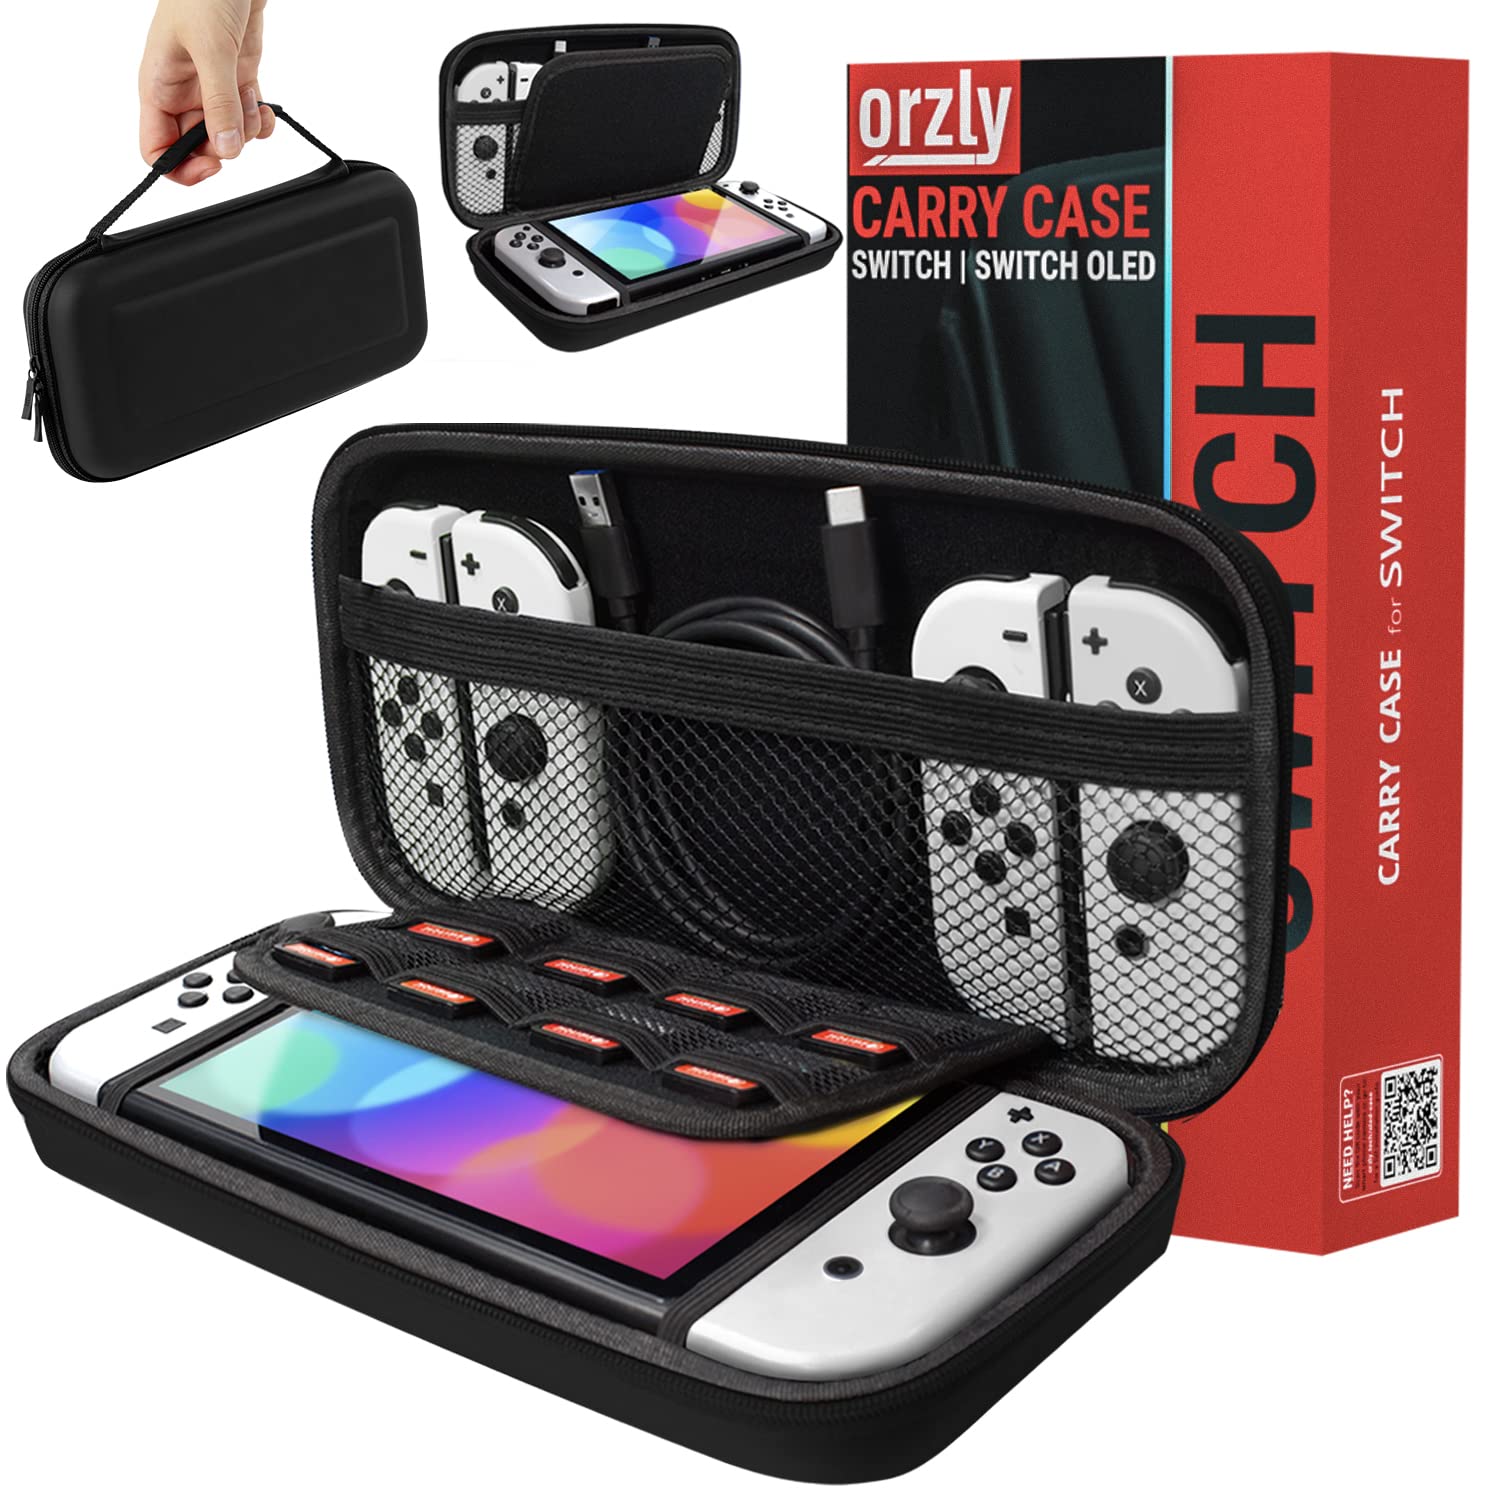 Orzly Switch carry case